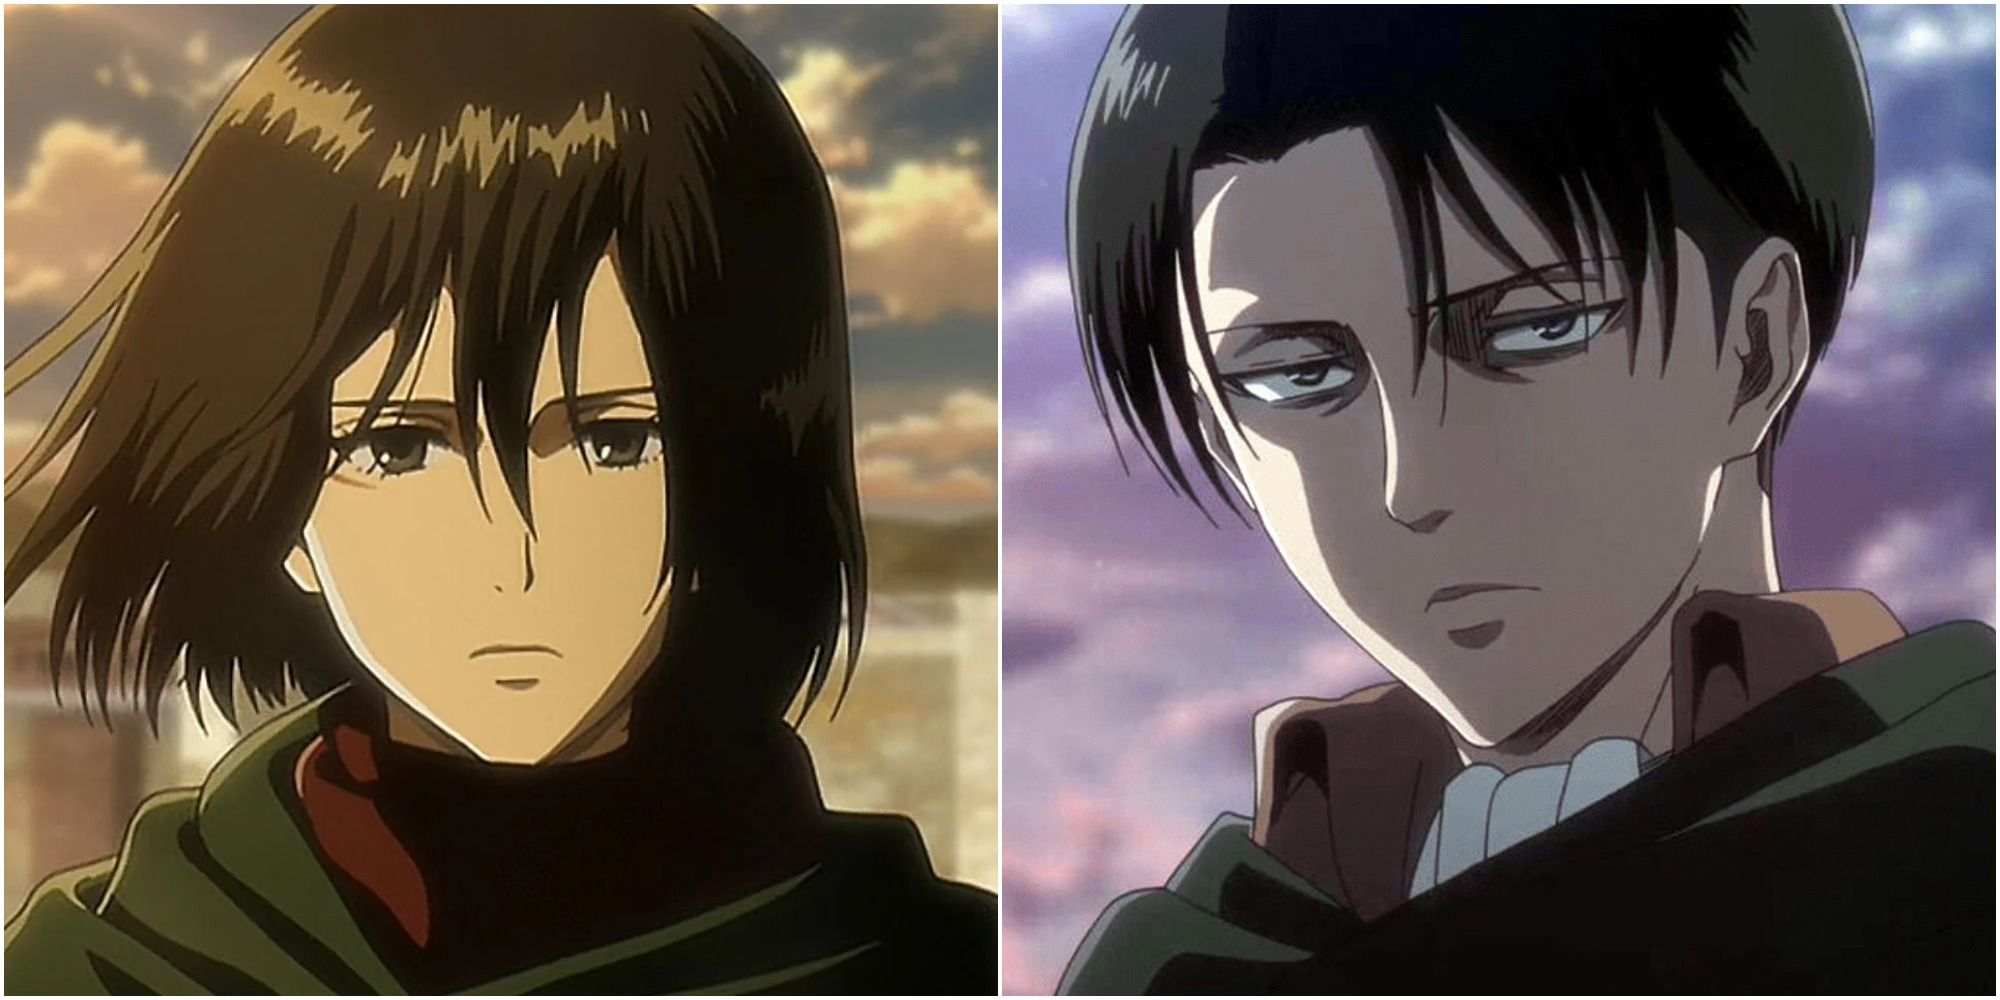 Mikasa Levi: Who Is The Stronger In Attack On Titan?